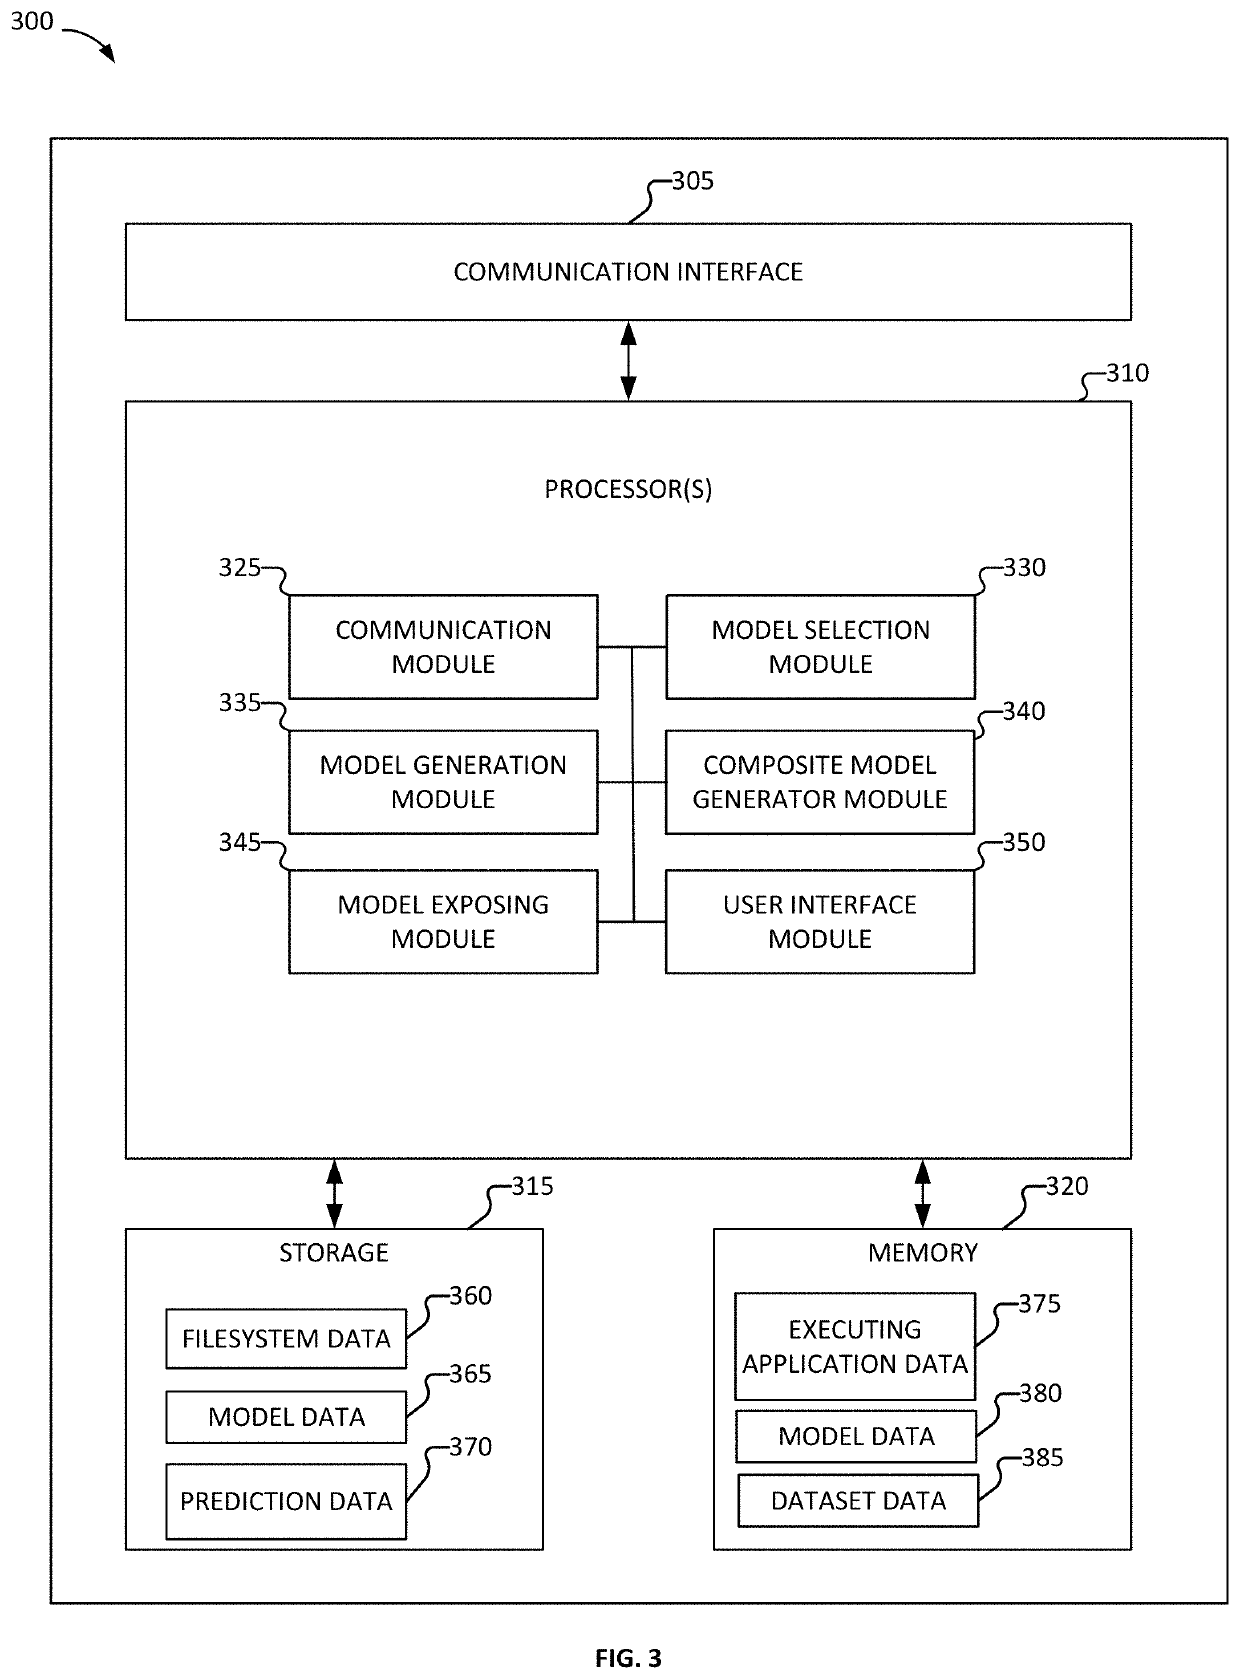 Automated processing of multiple prediction generation including model tuning